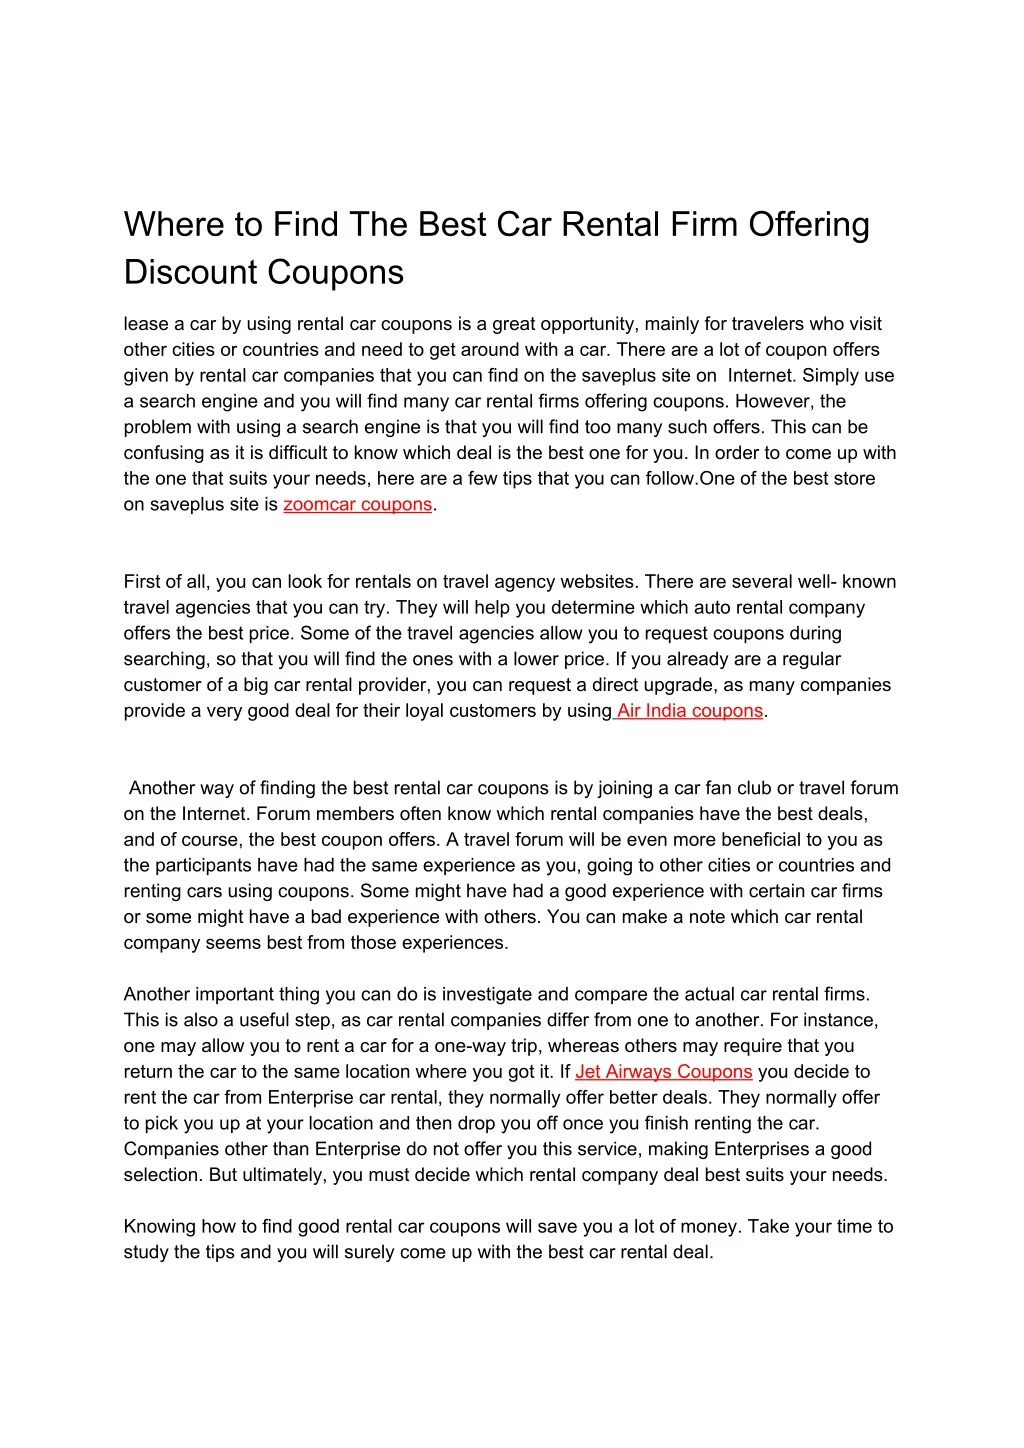 where to find the best car rental firm offering